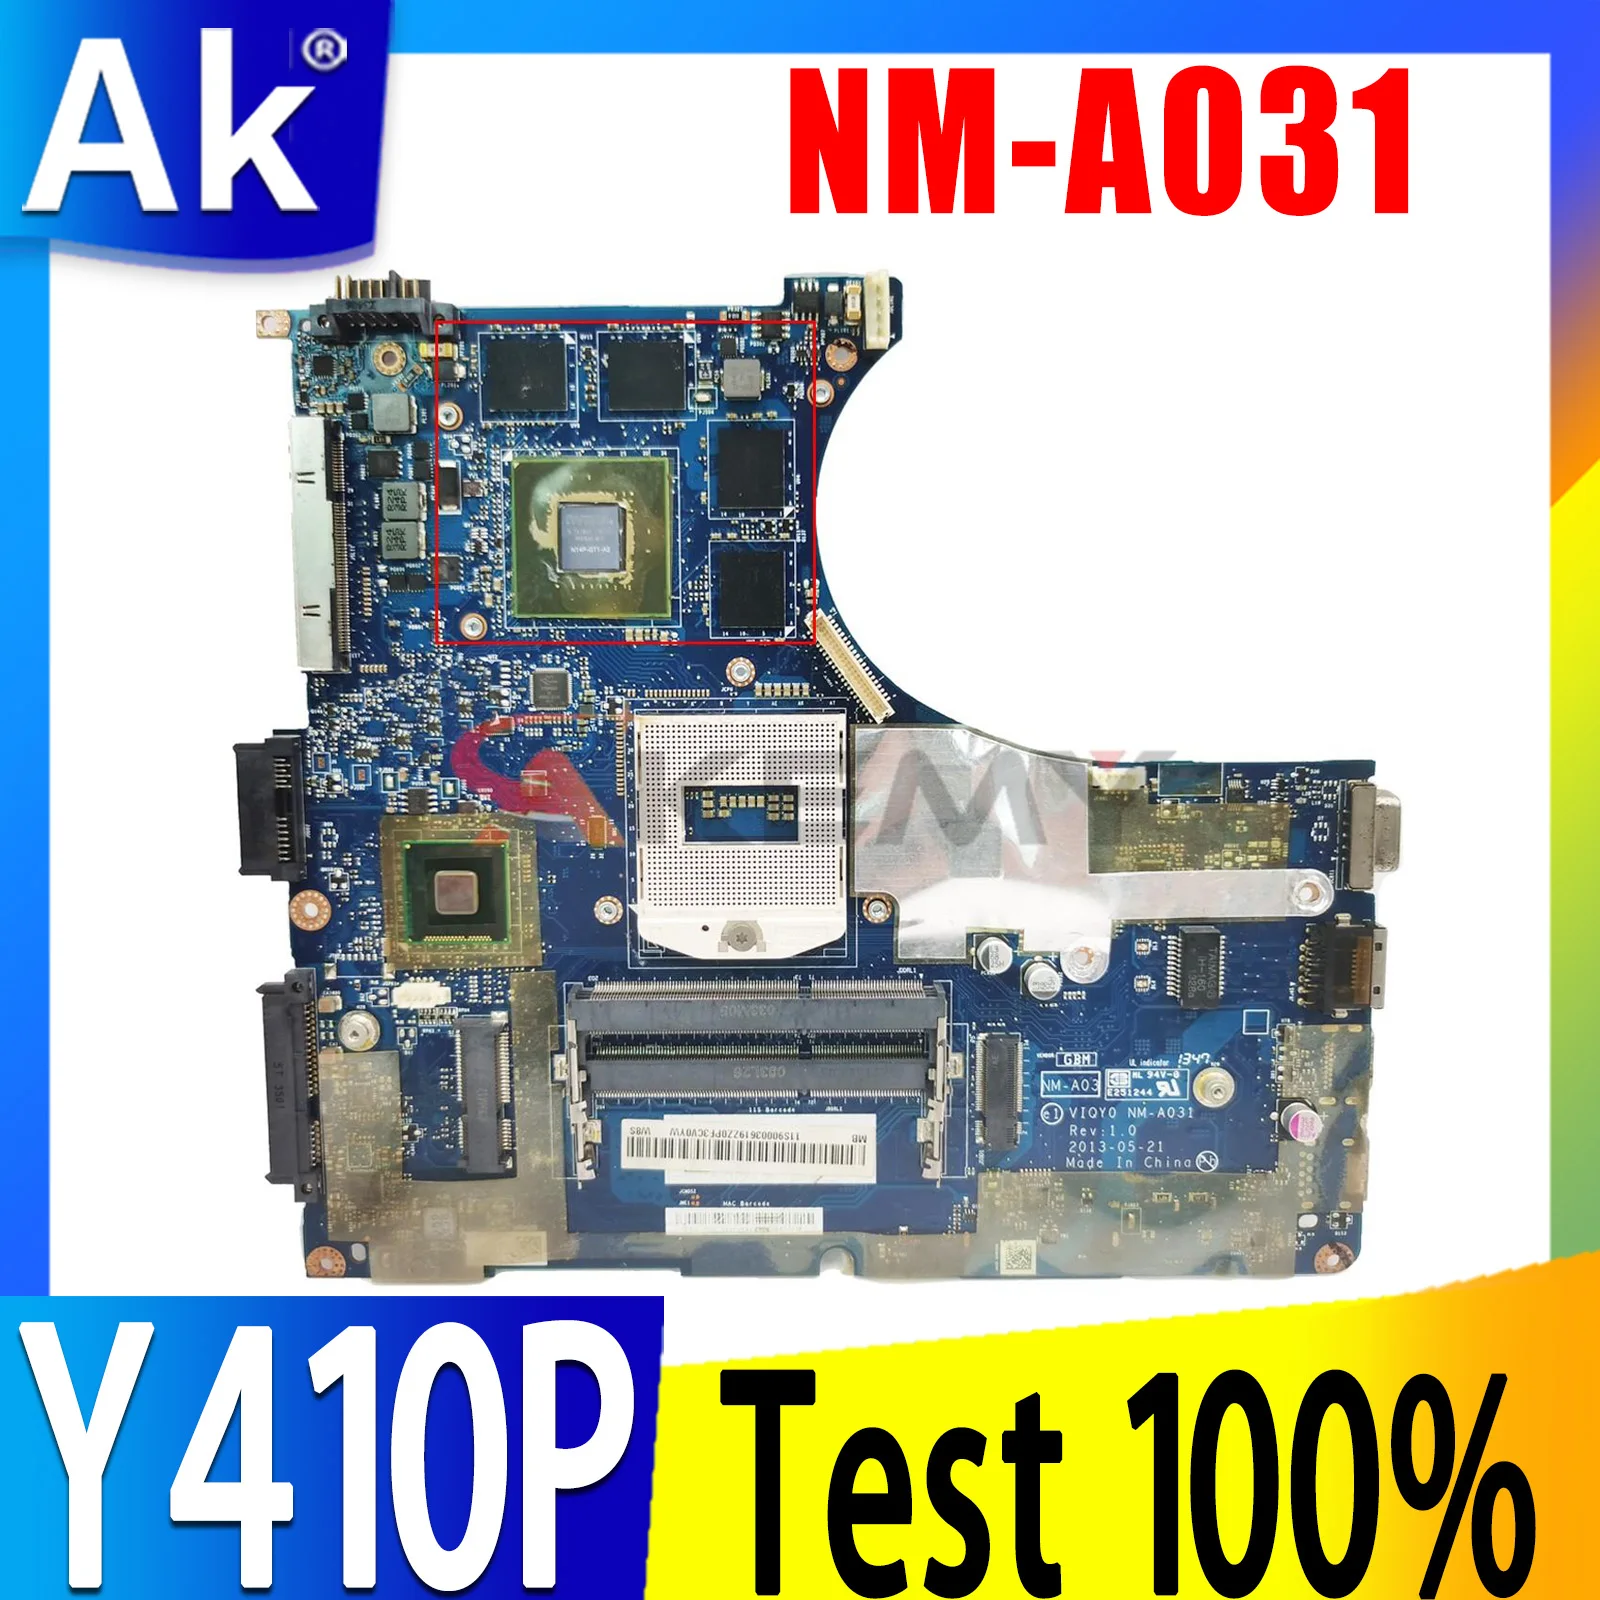 

For Lenovo Y410P Y430P Laptop Motherboard VIQY0 NM-A031 Motherboard PGA947 HM87 GPU GT750 GT755 GT850 2GB Tested 100% working